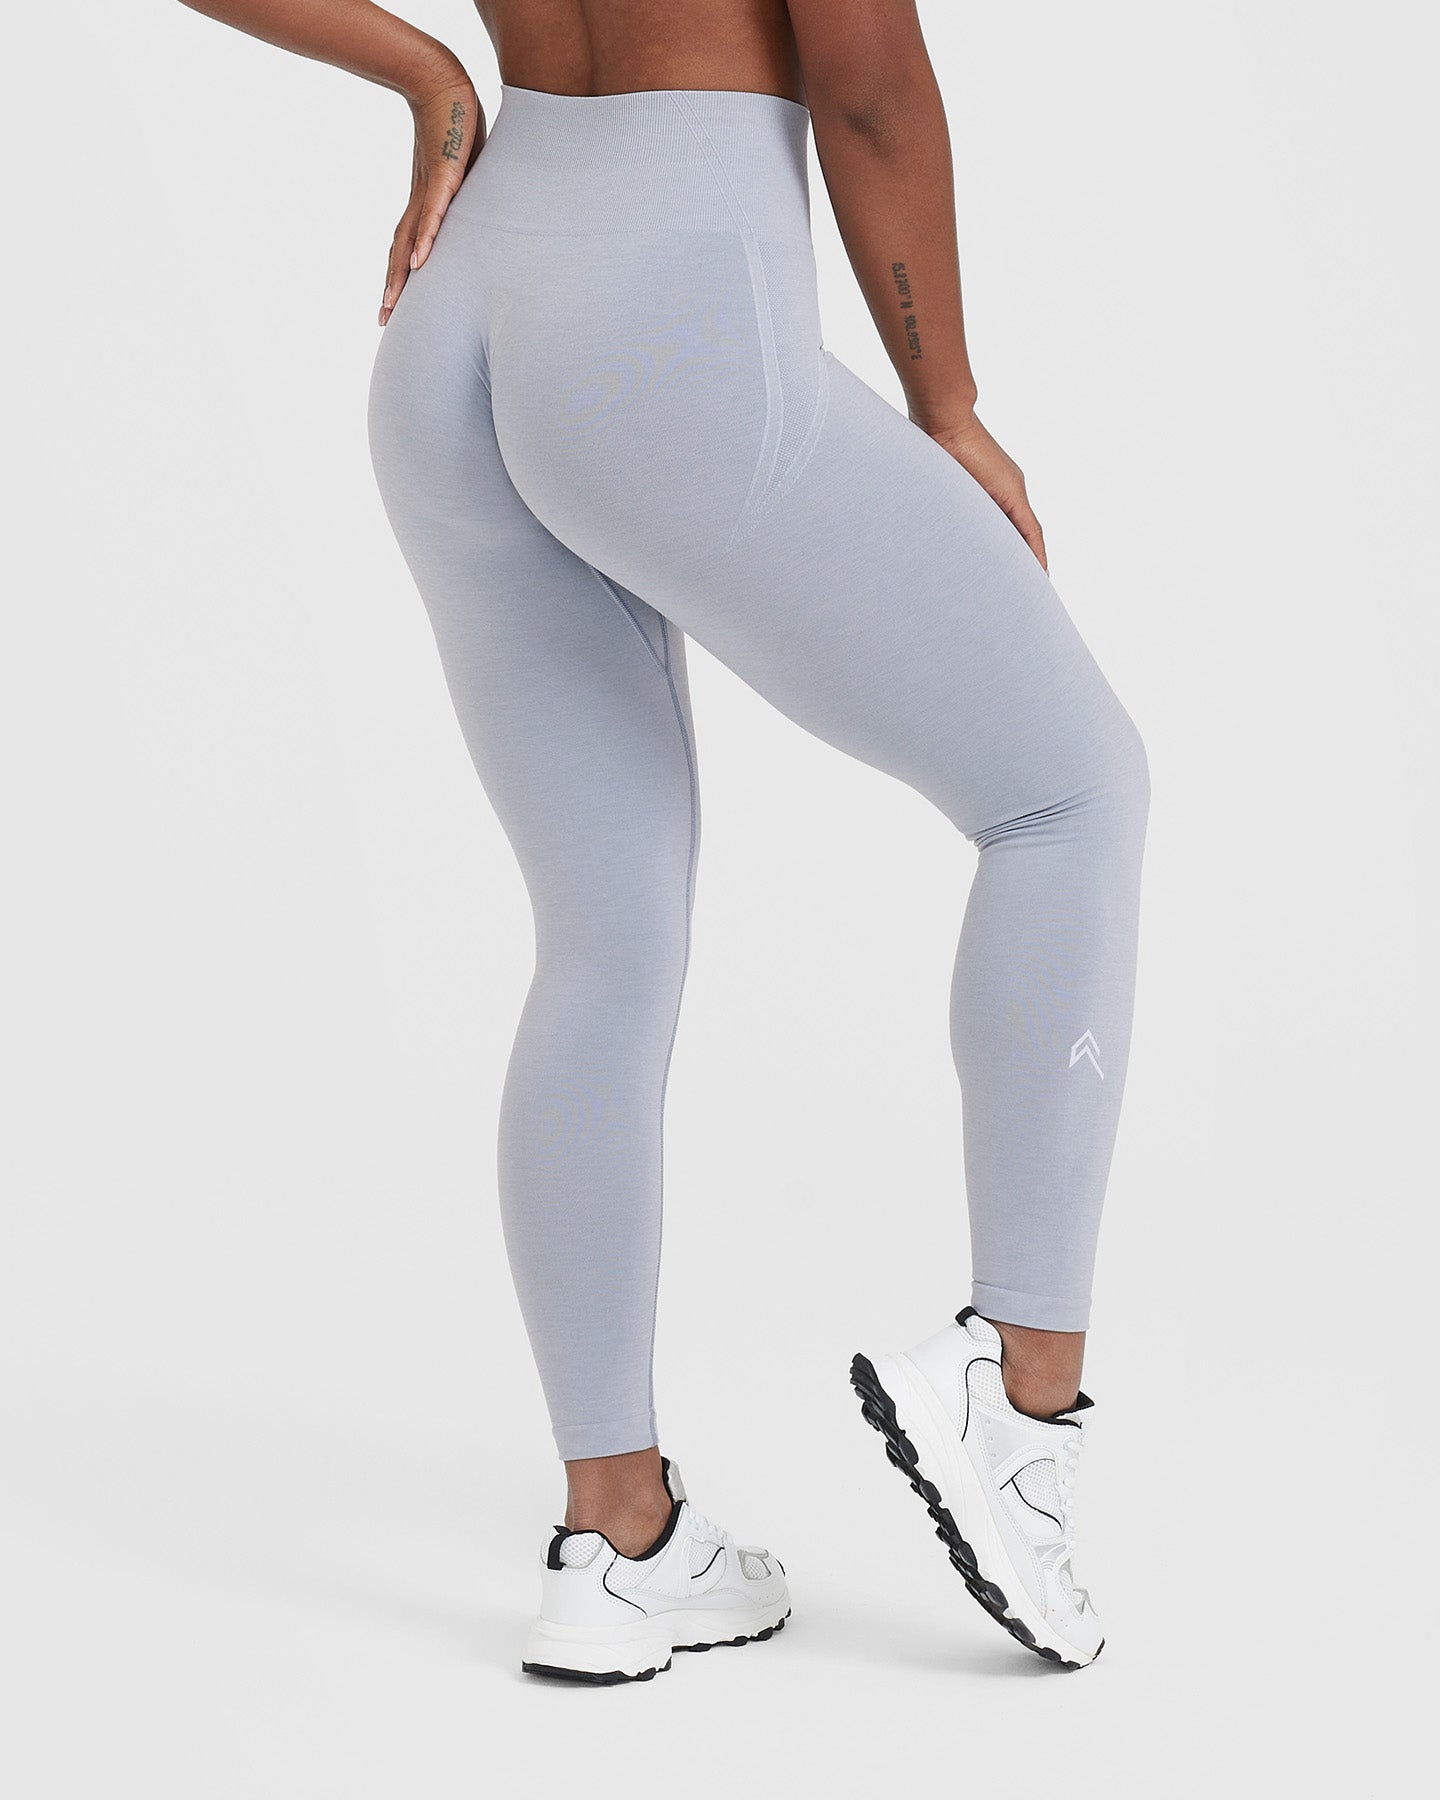 GYMSHARK ENERGY SEAMLESS Leggings small Grey High Waisted Perforated $26.00  - PicClick